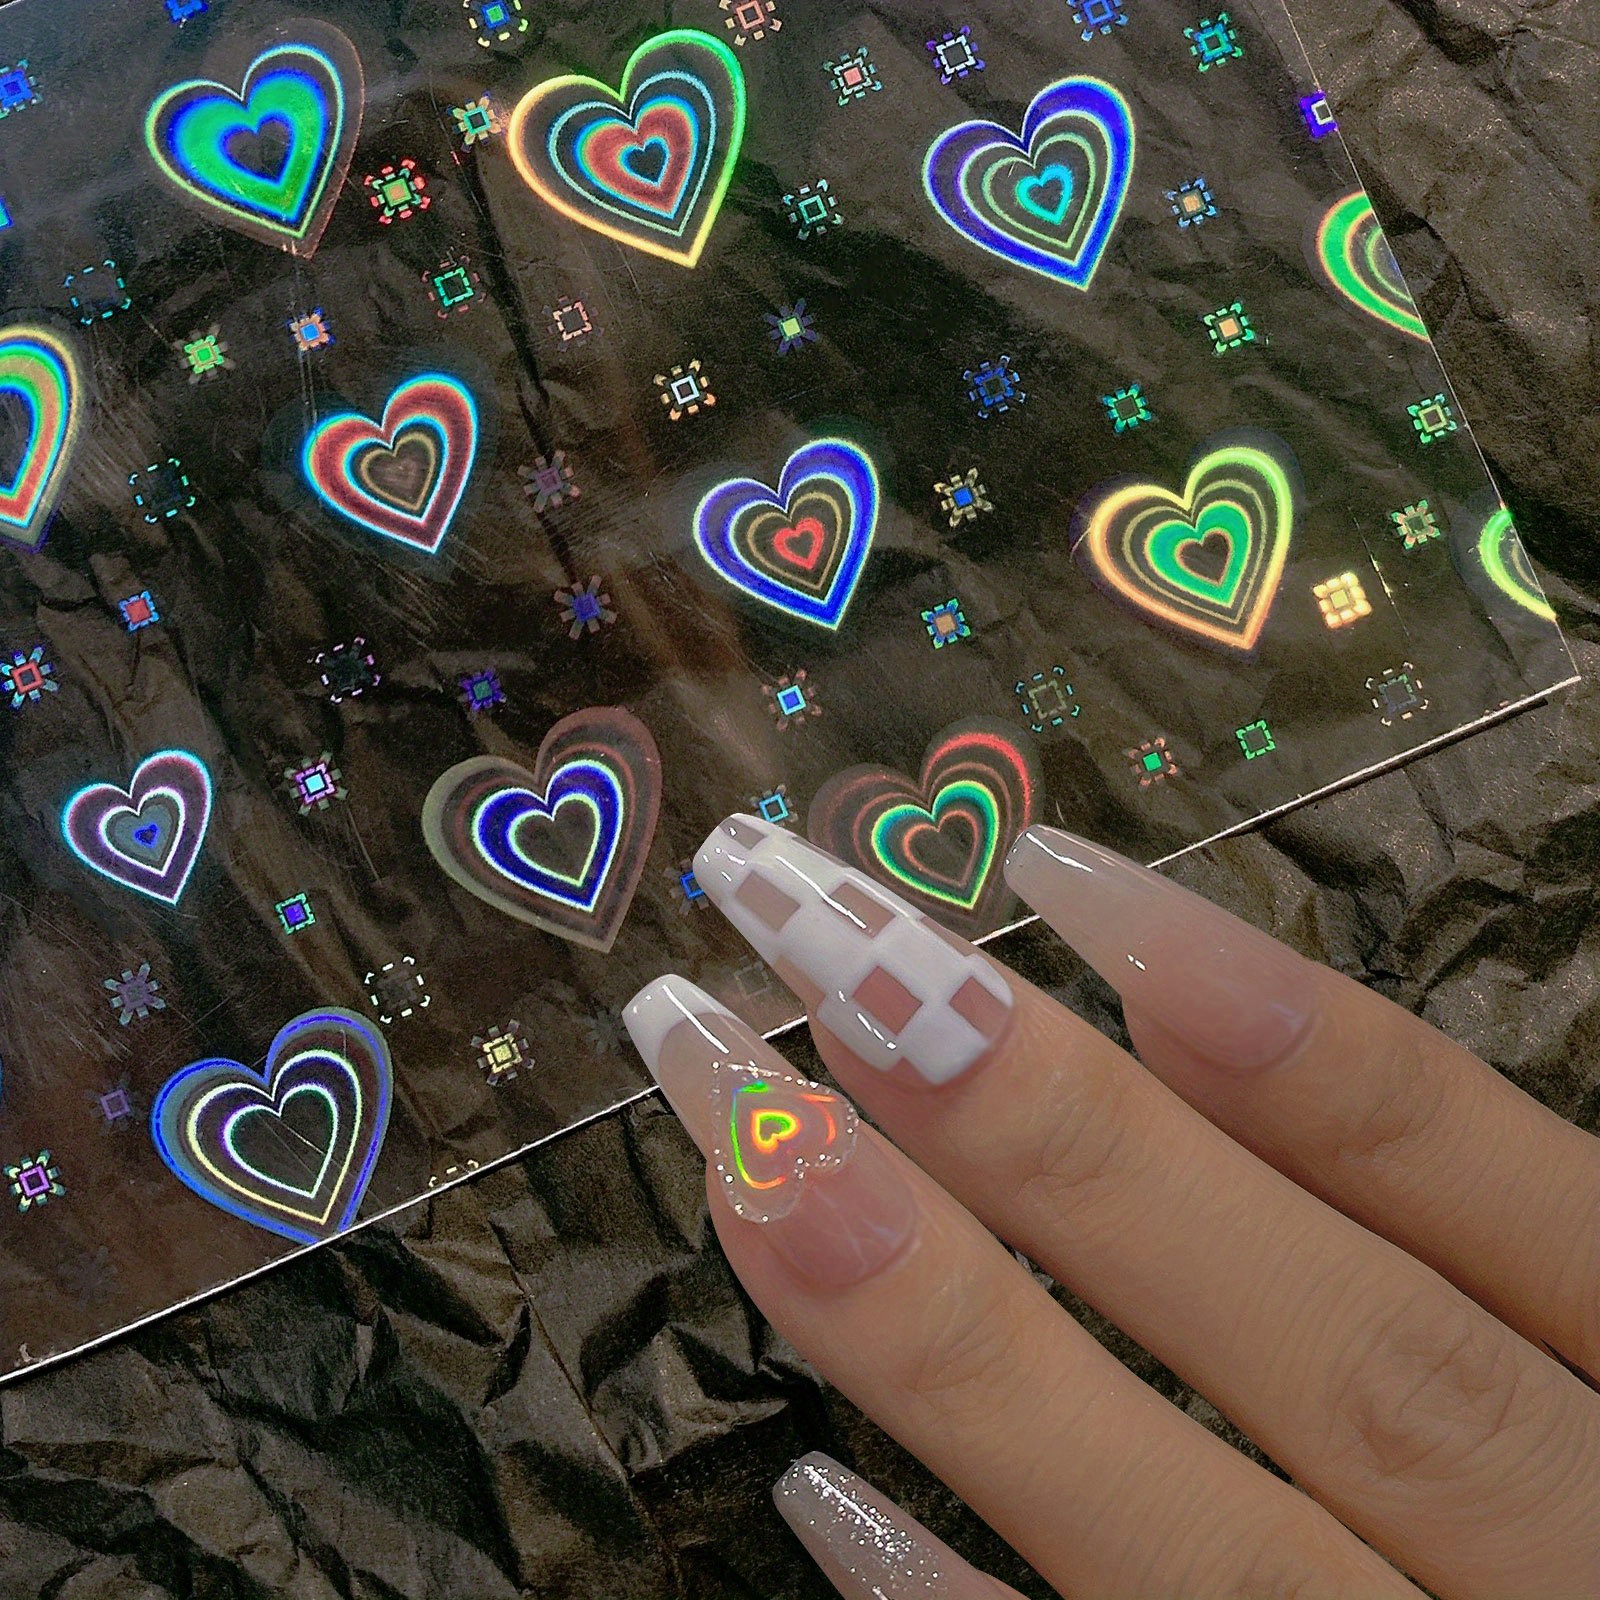 sticker decal for louis vuitton nail stickers